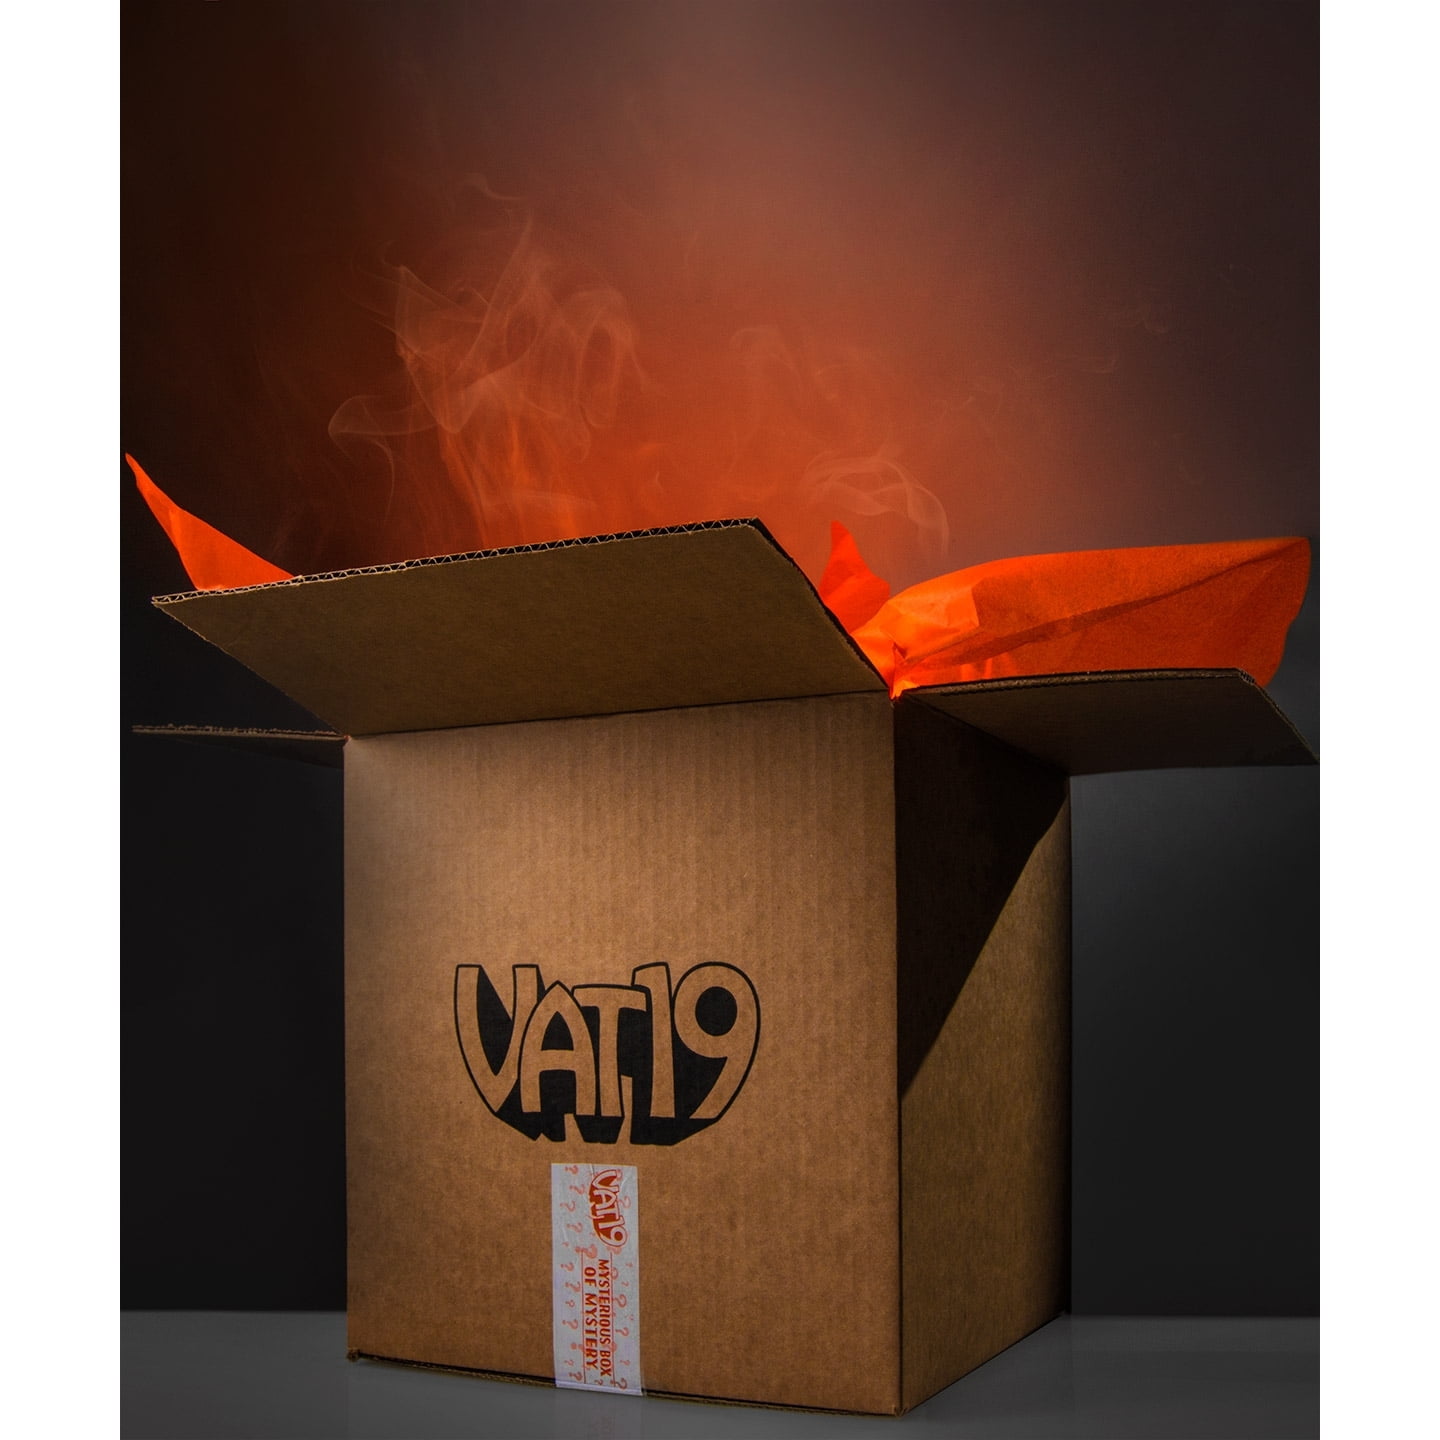 The Mysterious Box of Mystery: Surprise curated selection of Vat19 goodies.